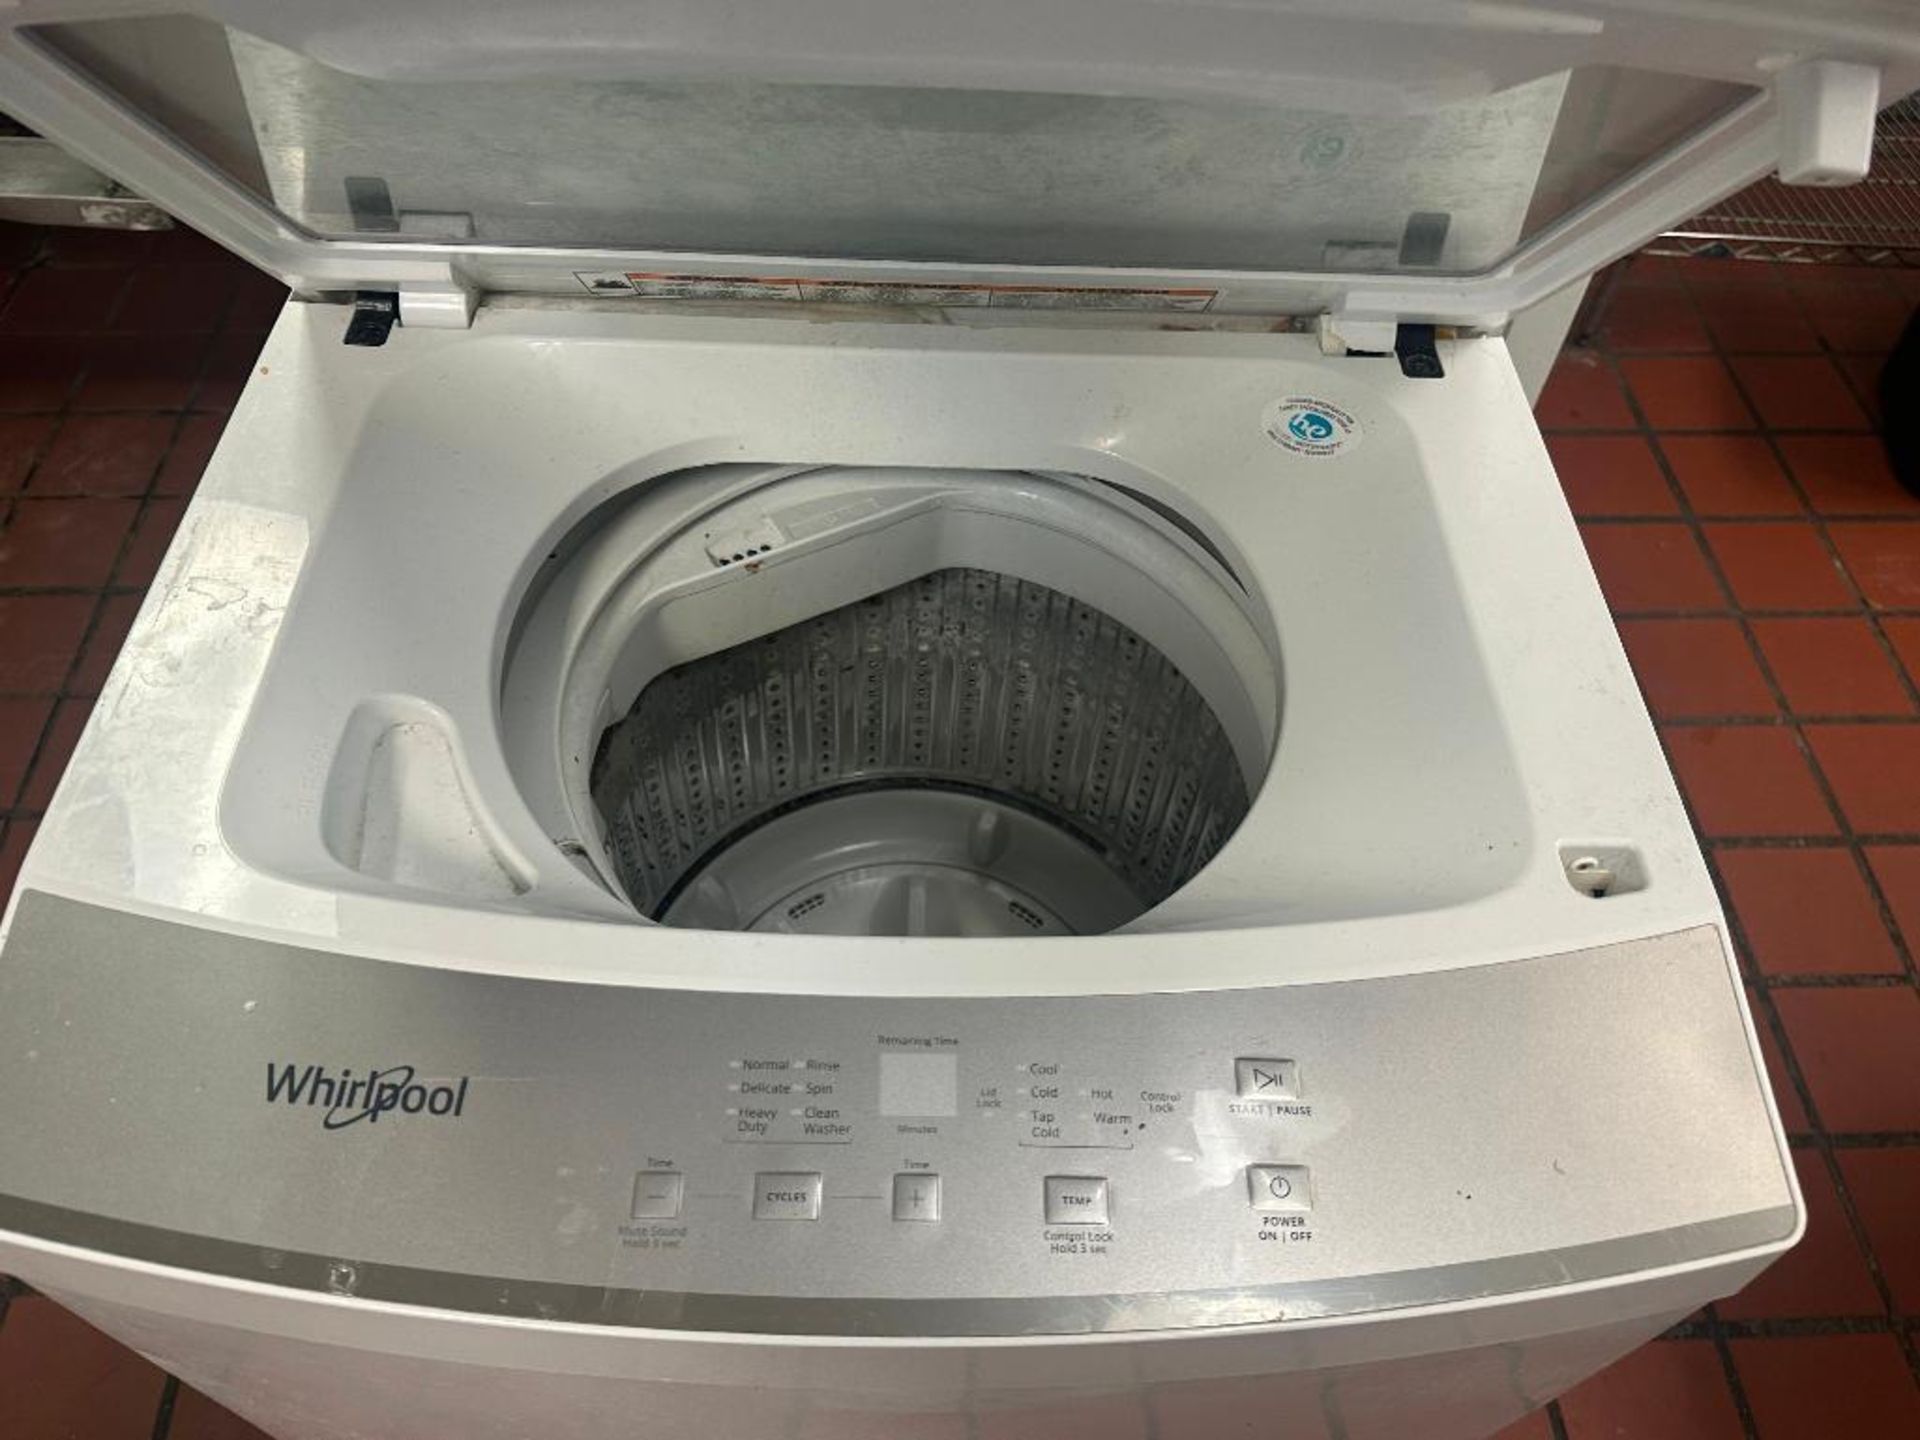 DESCRIPTION WHIRLPOOL WASHER AND DRYER ALL IN ONE BRAND / MODEL: WHIRLPOOL LOCATION 7399 O'Connor Dr - Image 4 of 4